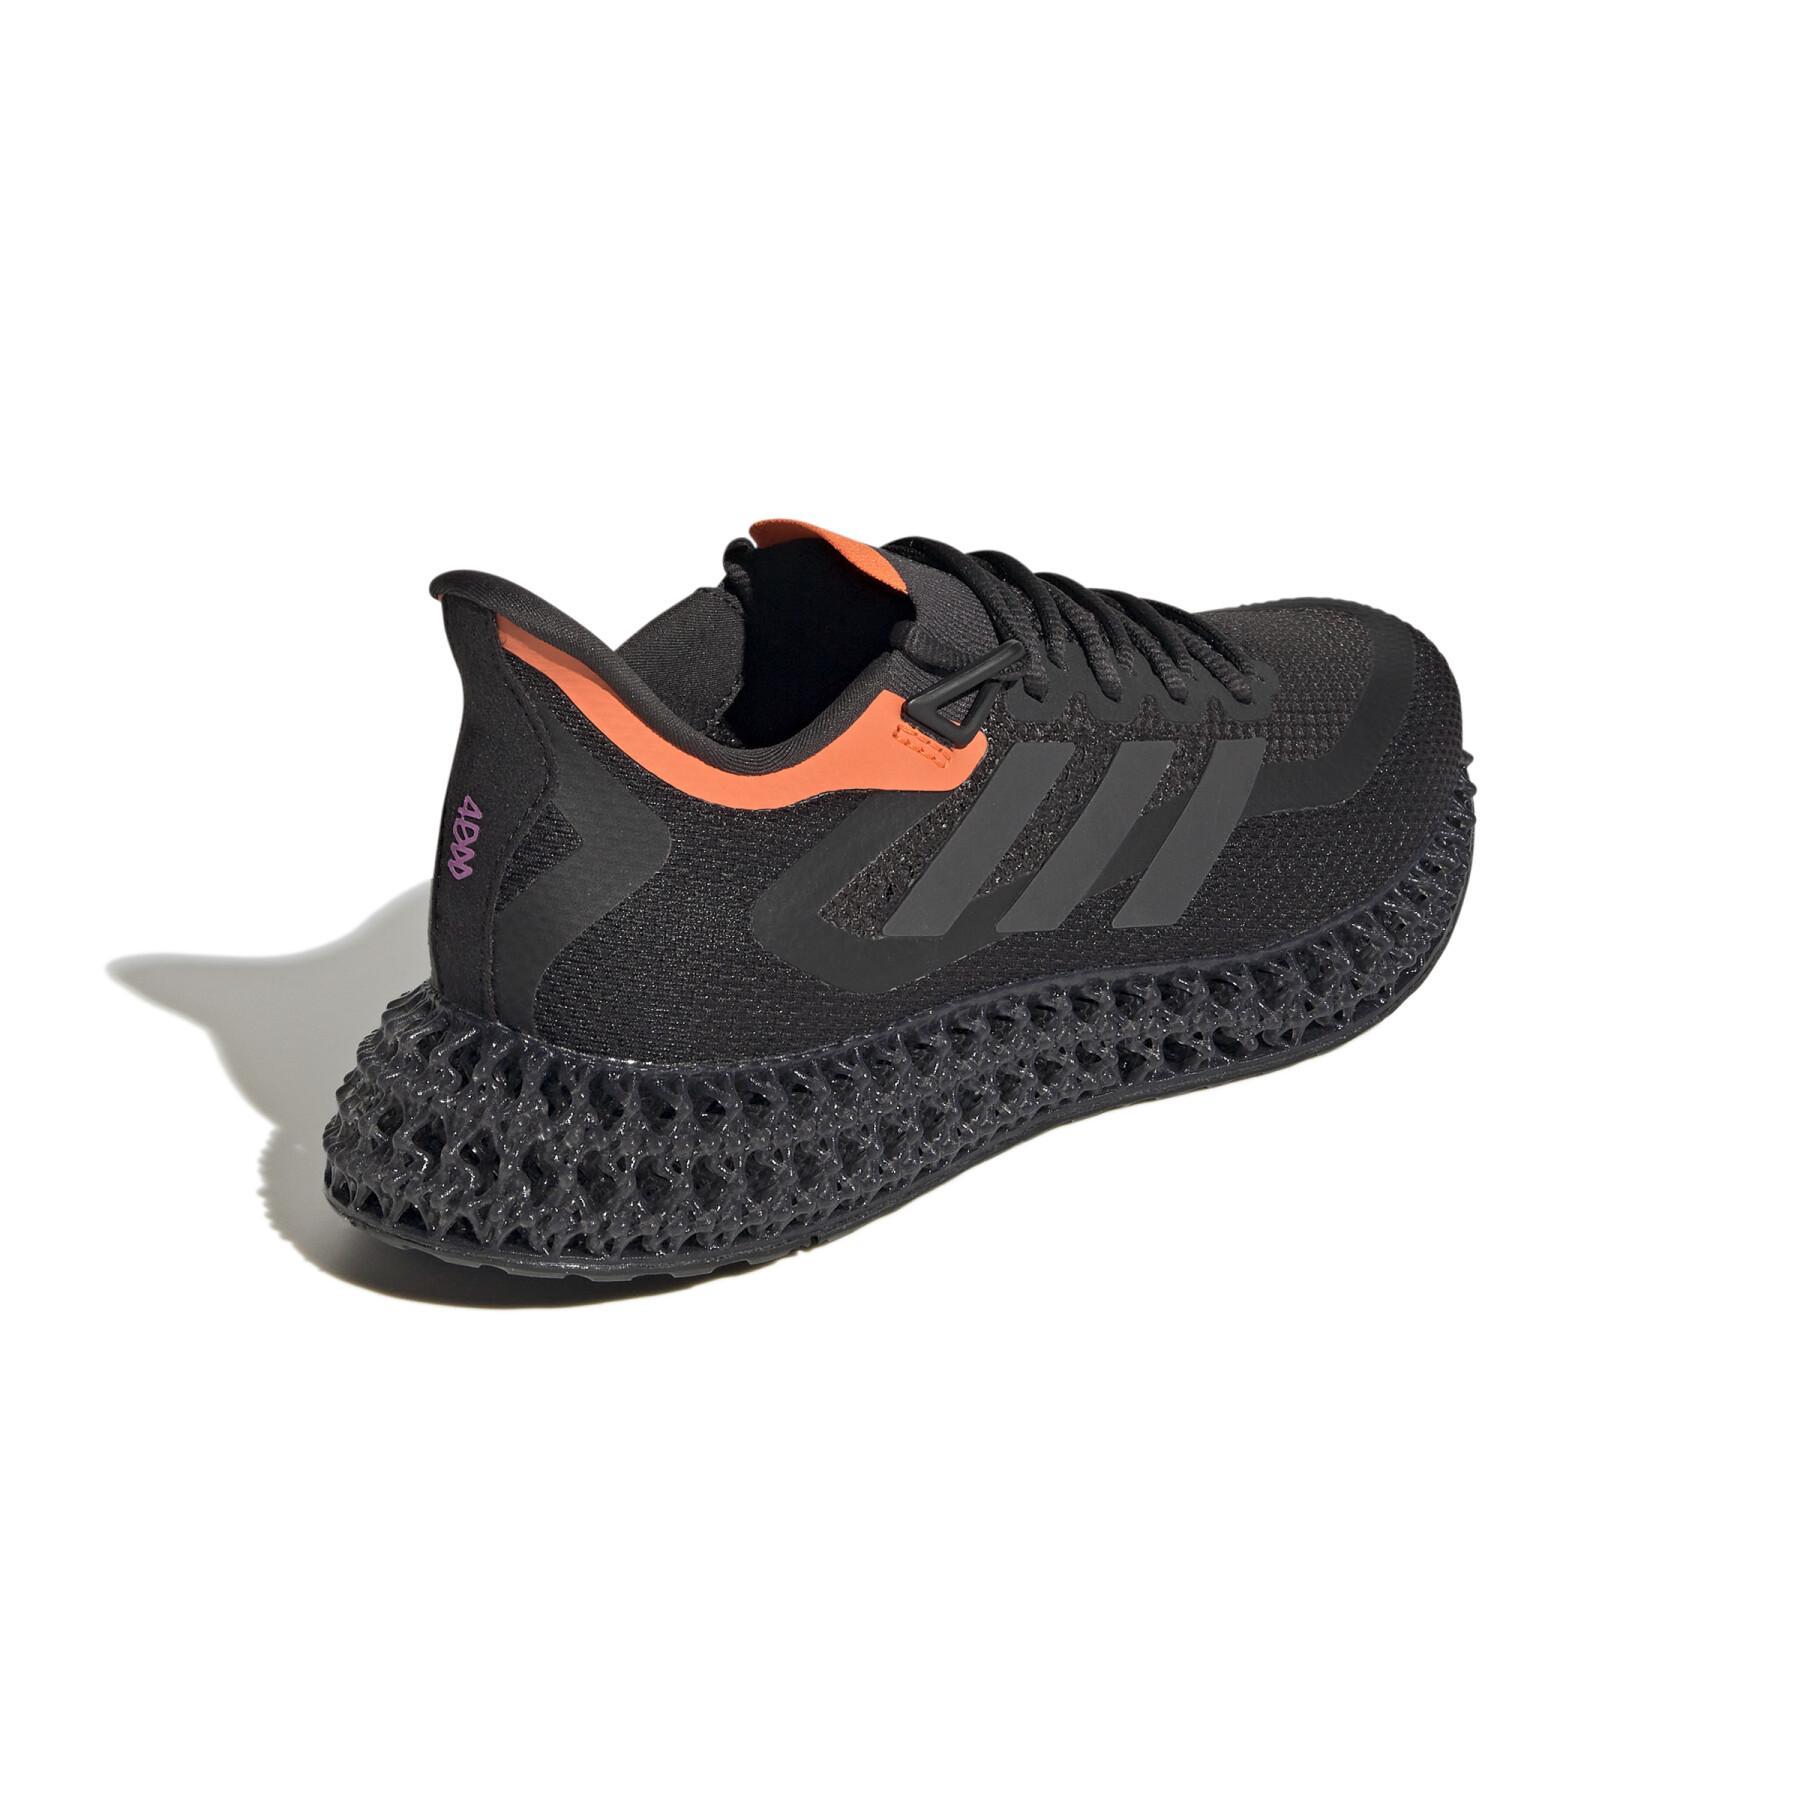 Running shoes adidas 4DFWD 2